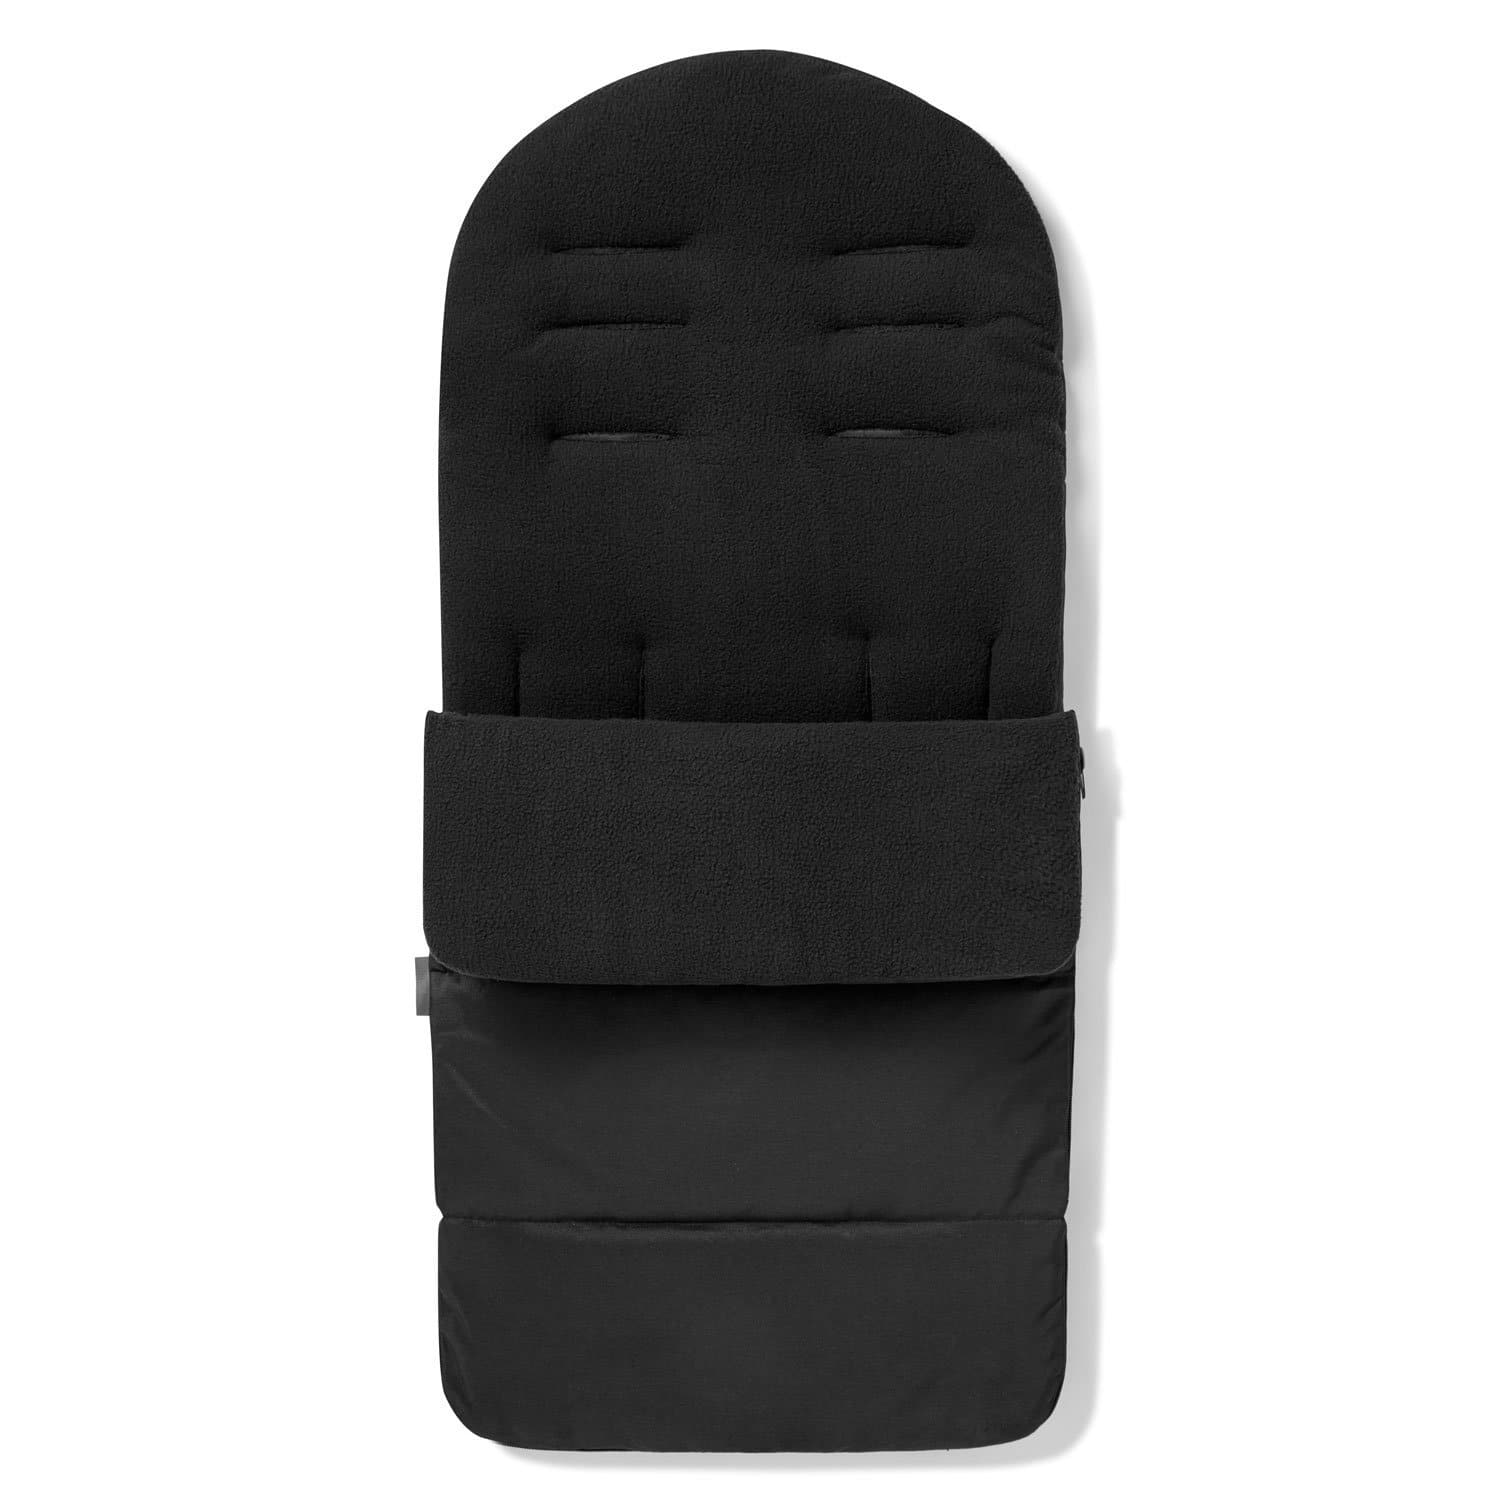 Premium Footmuff / Cosy Toes Compatible with Hesba - Black Jack / Fits All Models | For Your Little One